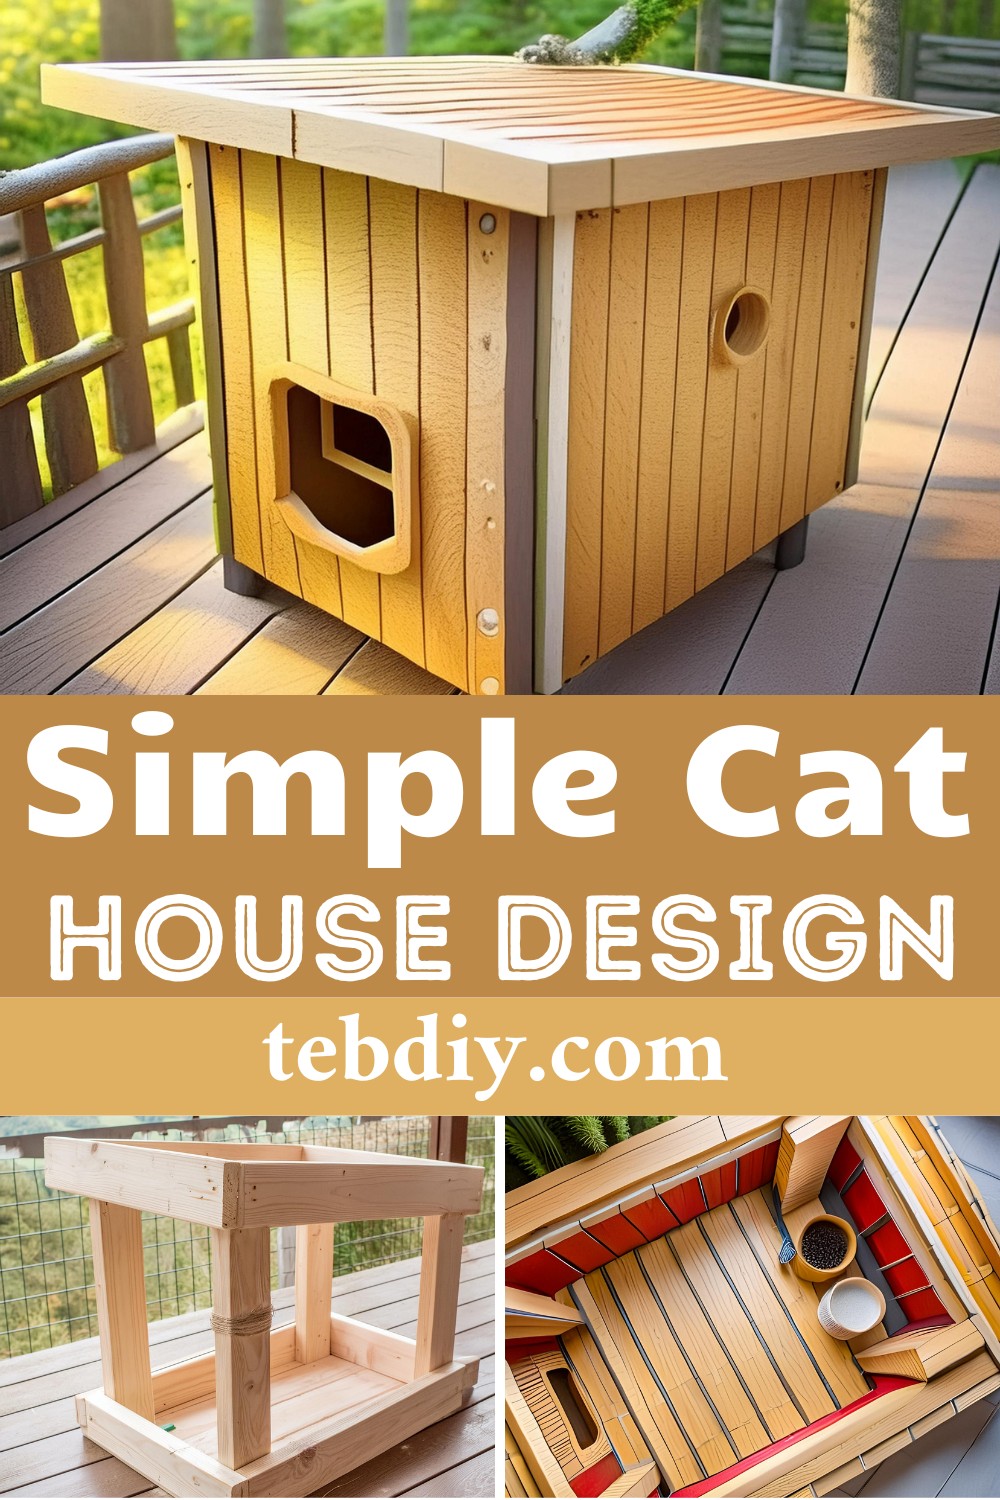 How To Make A Simple Cat House Design